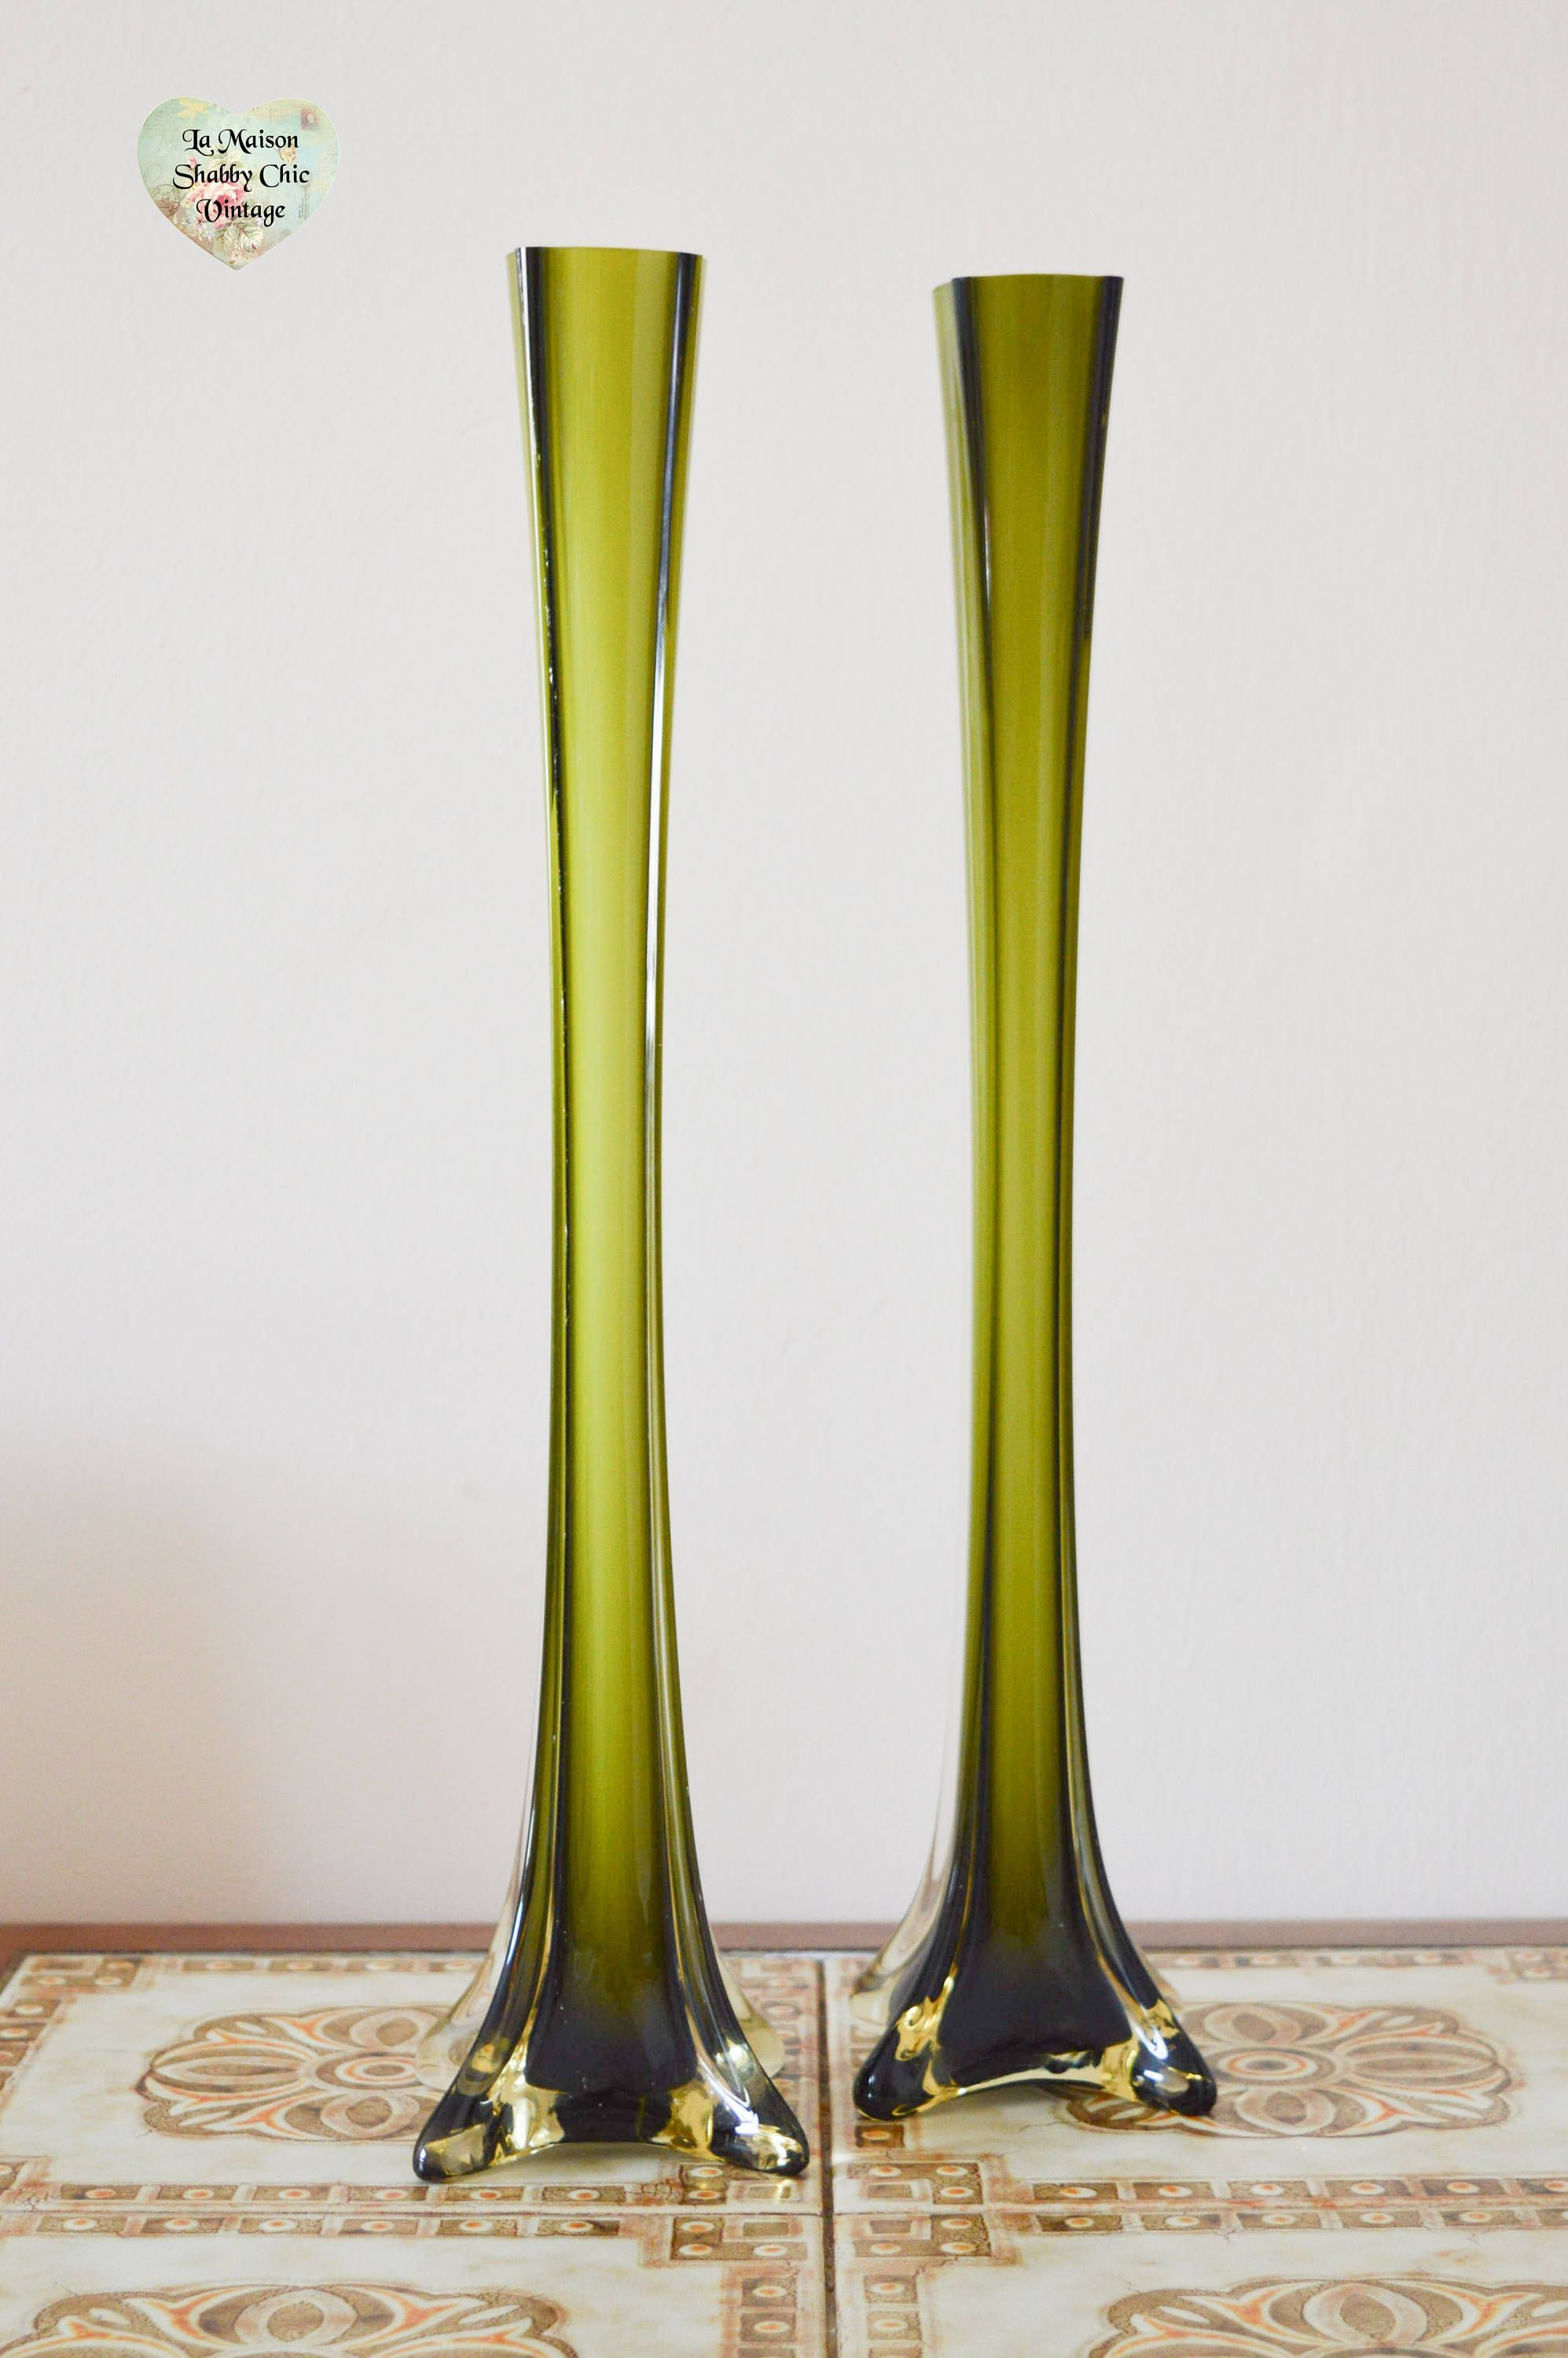 16 Stylish Antique Hand Painted Floral Vases 2024 free download antique hand painted floral vases of 35 antique green glass vases the weekly world with regard to retro skinny glass vases pair 2 shades of green retro flower vases